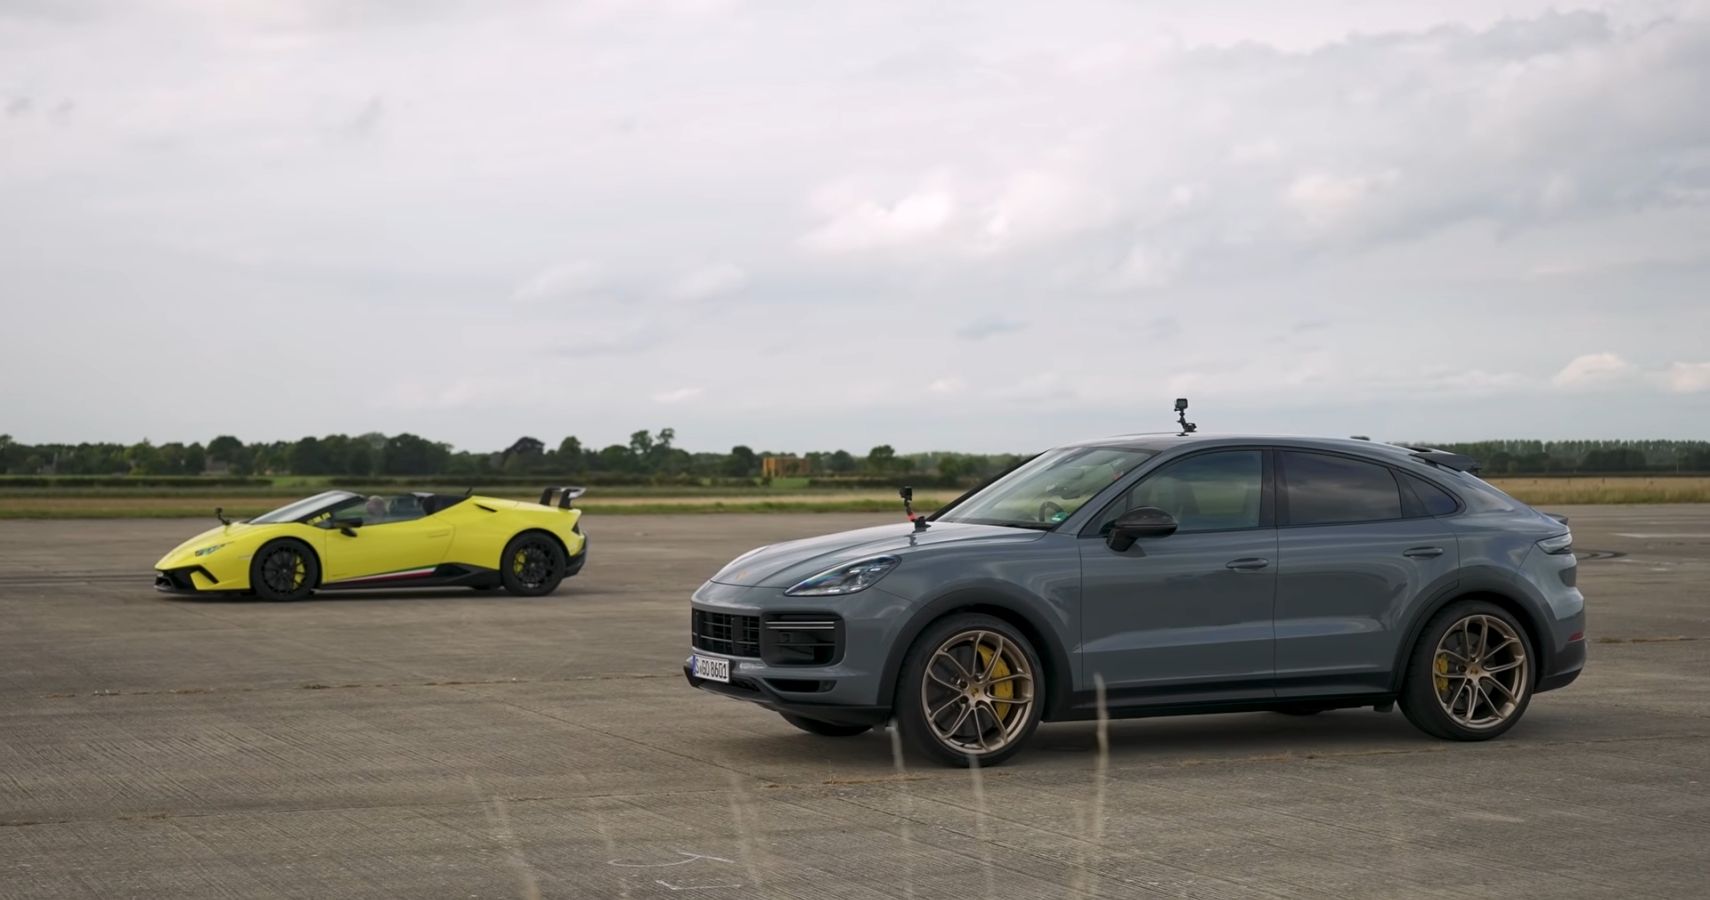 Lamborghini Huracan Performante Takes On A Nissan GT-R And Porsche Cayenne Turbo GT